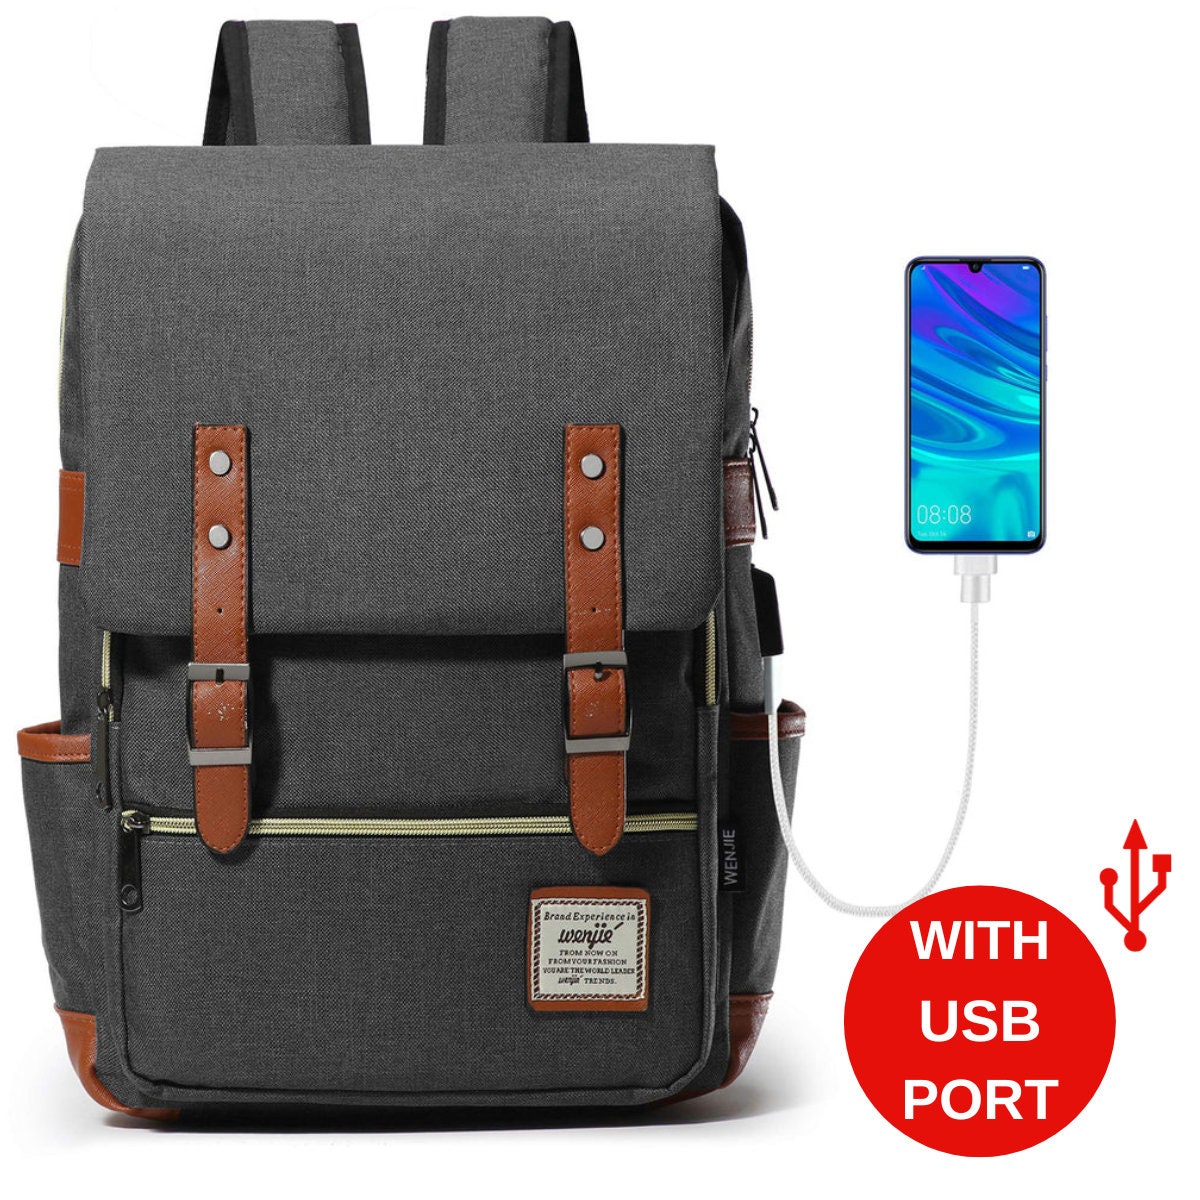 EN-ABLED Waterproof Travel Laptop Backpack With USB Port 15.6 Inch Backpack  Storage for Gaming Components & Accessories Grey 